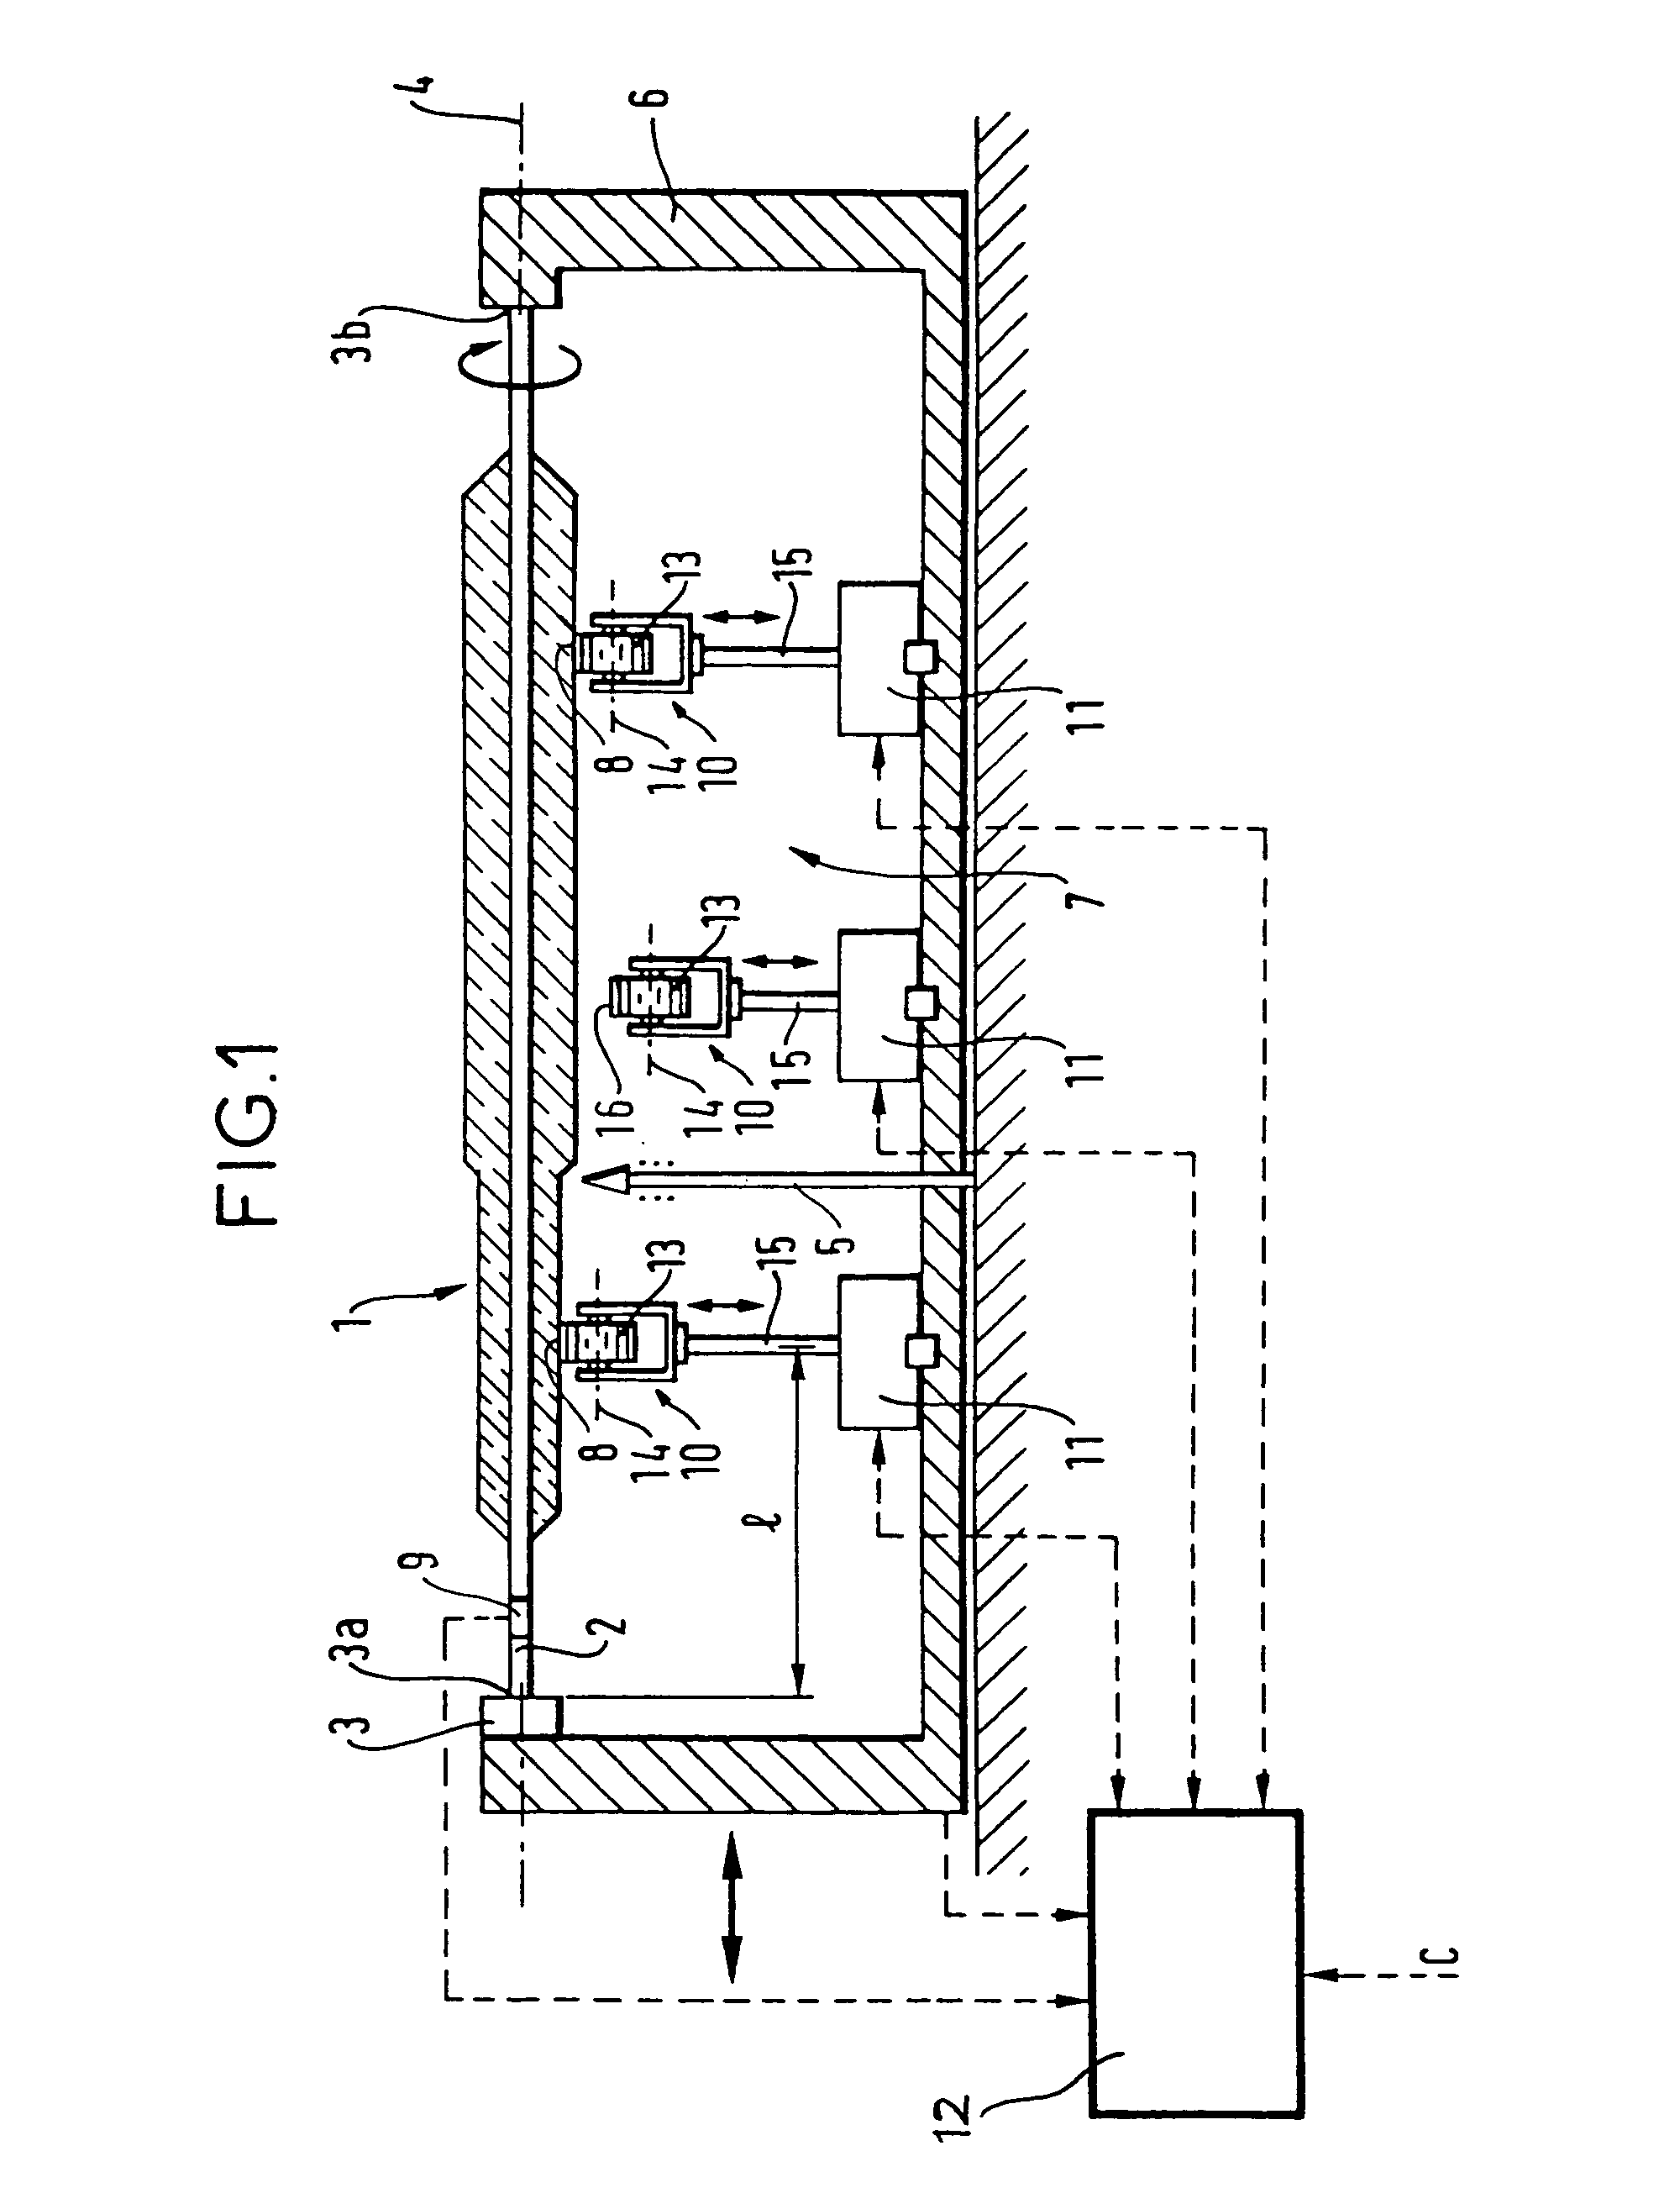 Apparatus for supporting a preform having a supporting core